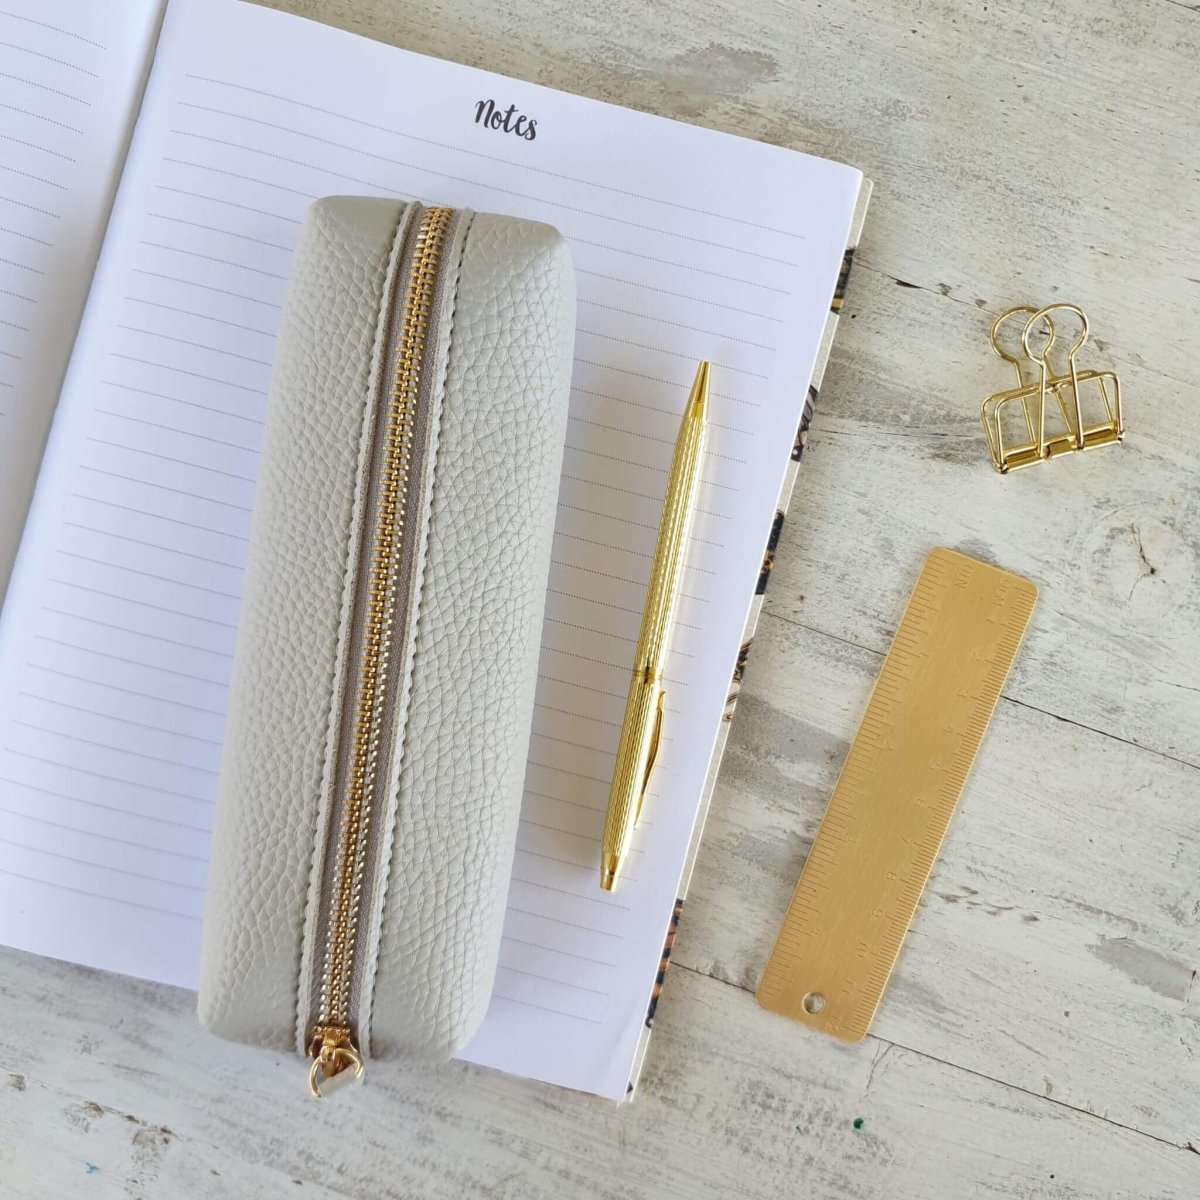 light grey pencil case on notebook with gold stationery